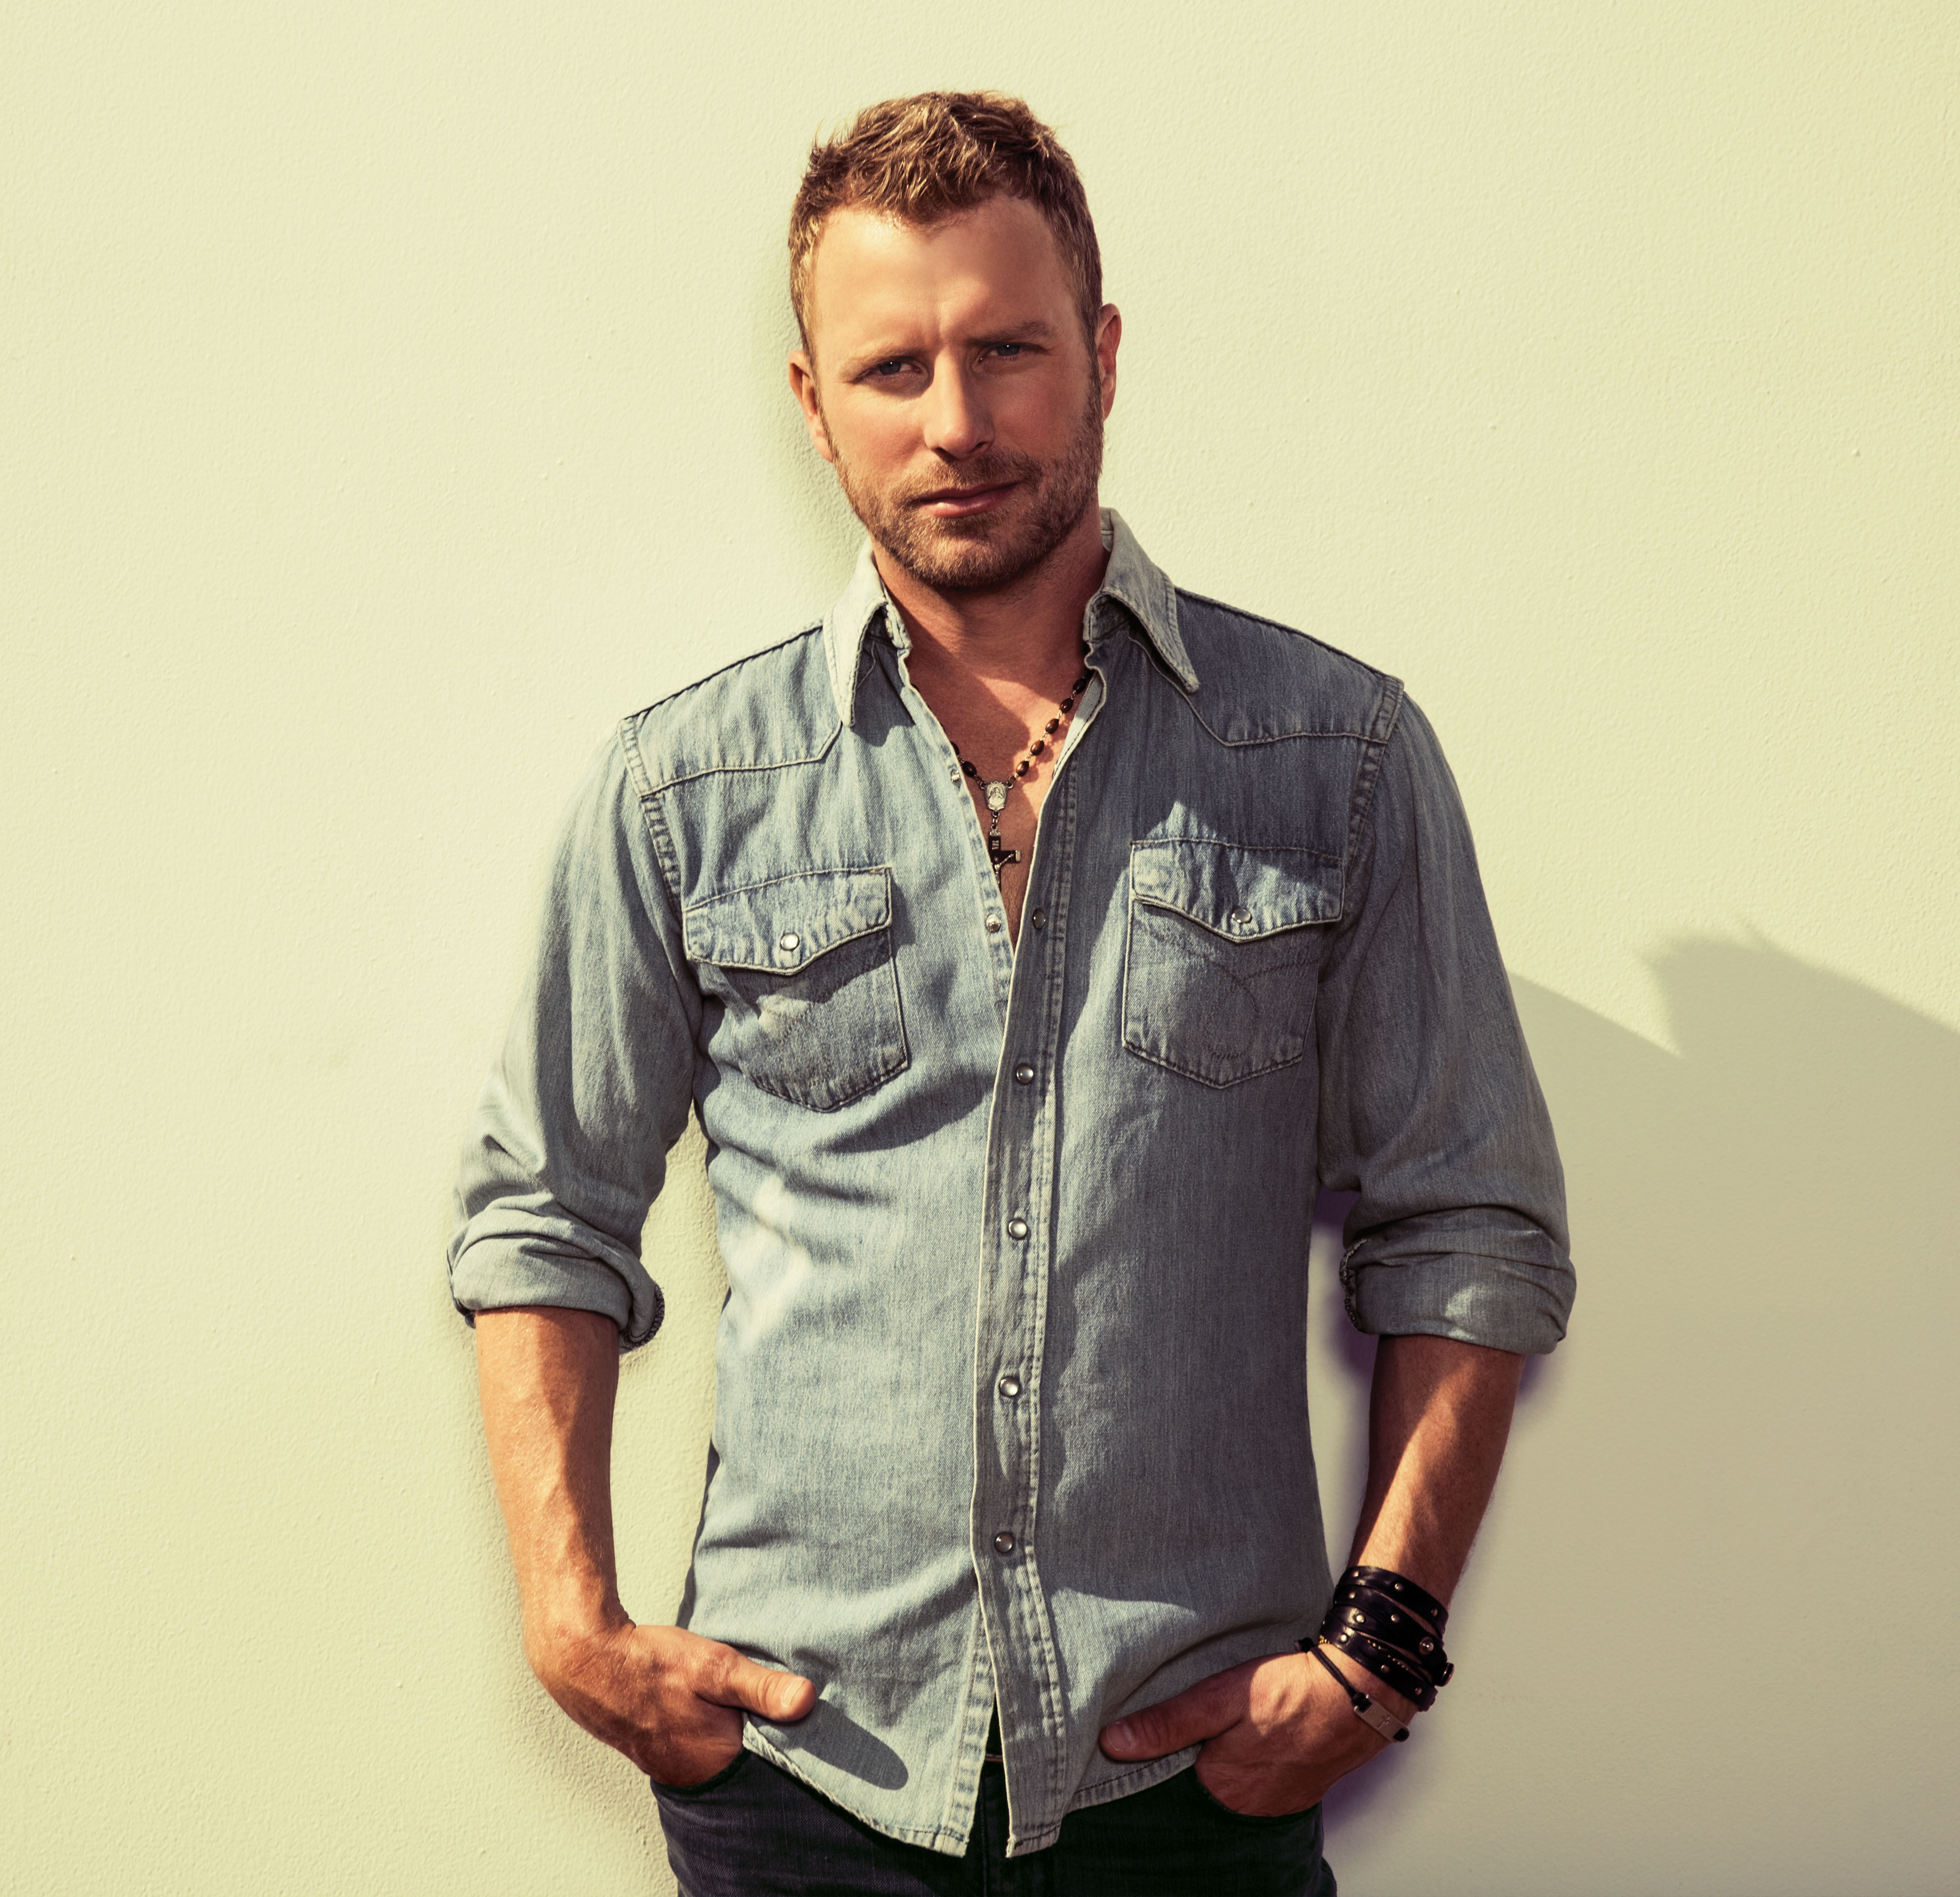 Dierks bentley heads into grammy week with bi-coastal television appearance...